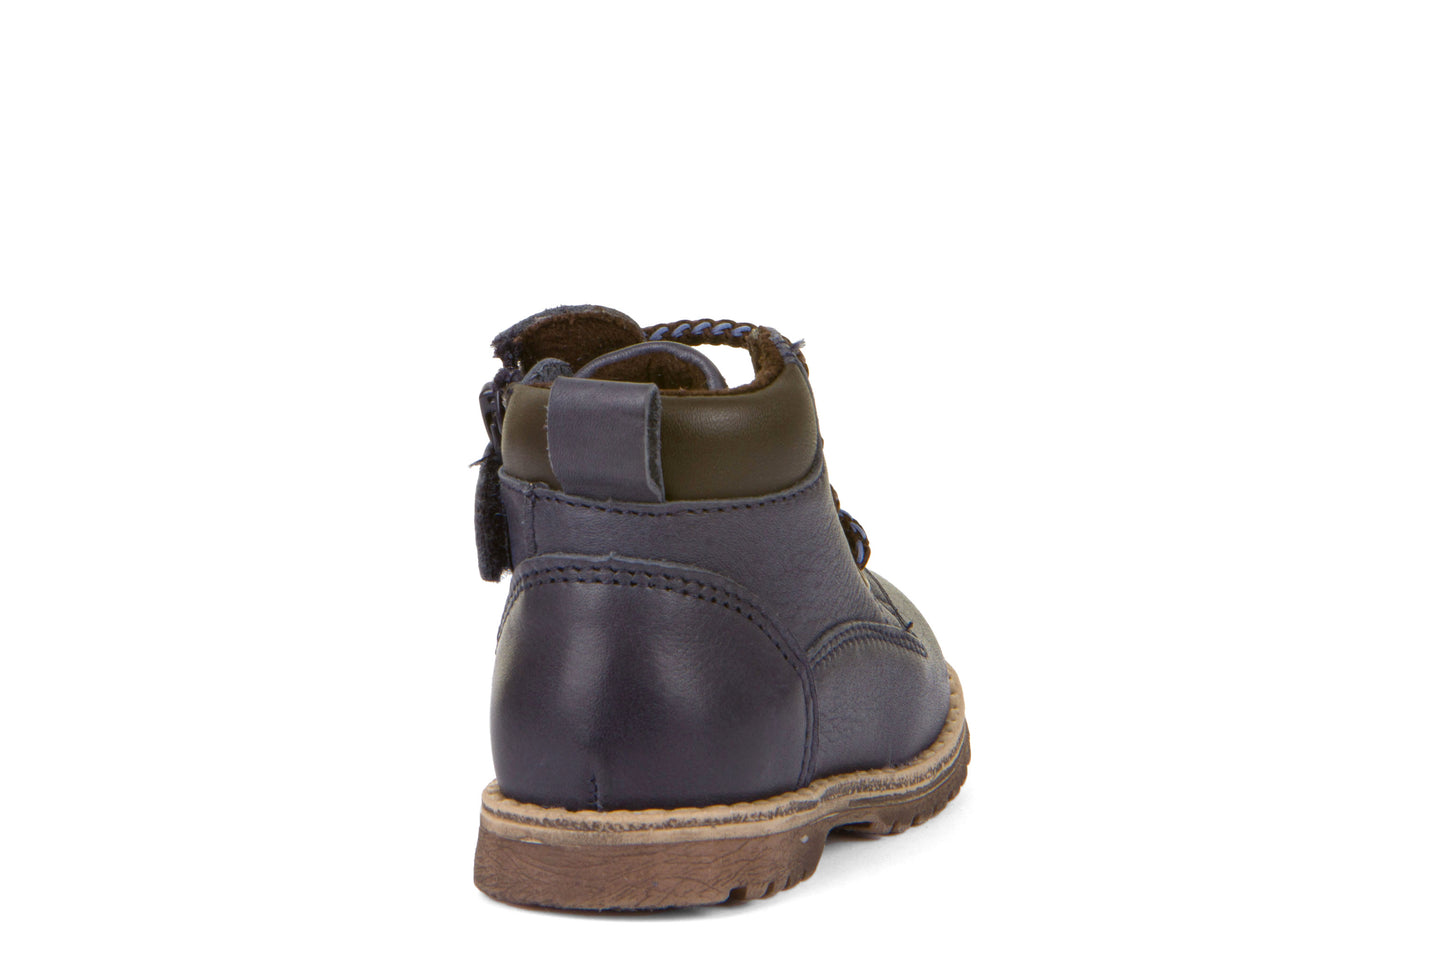 A boys boot by Froddo, style Mono  G2110108-2 in Navy with lace, zip fastening. Back view.